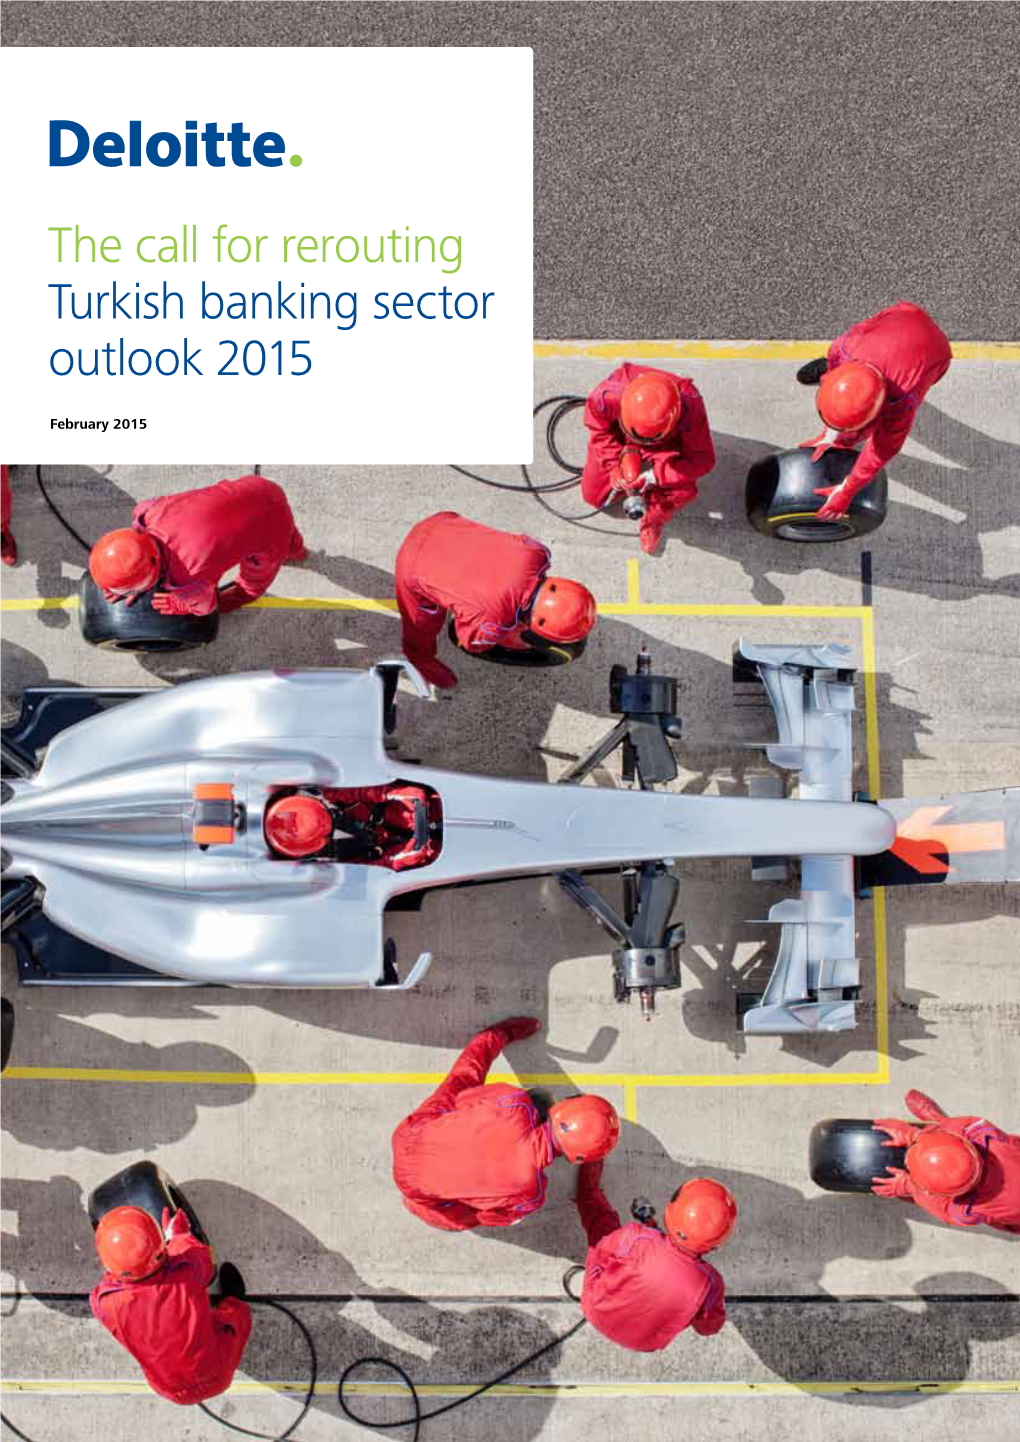 The Call for Rerouting Turkish Banking Sector Outlook 2015